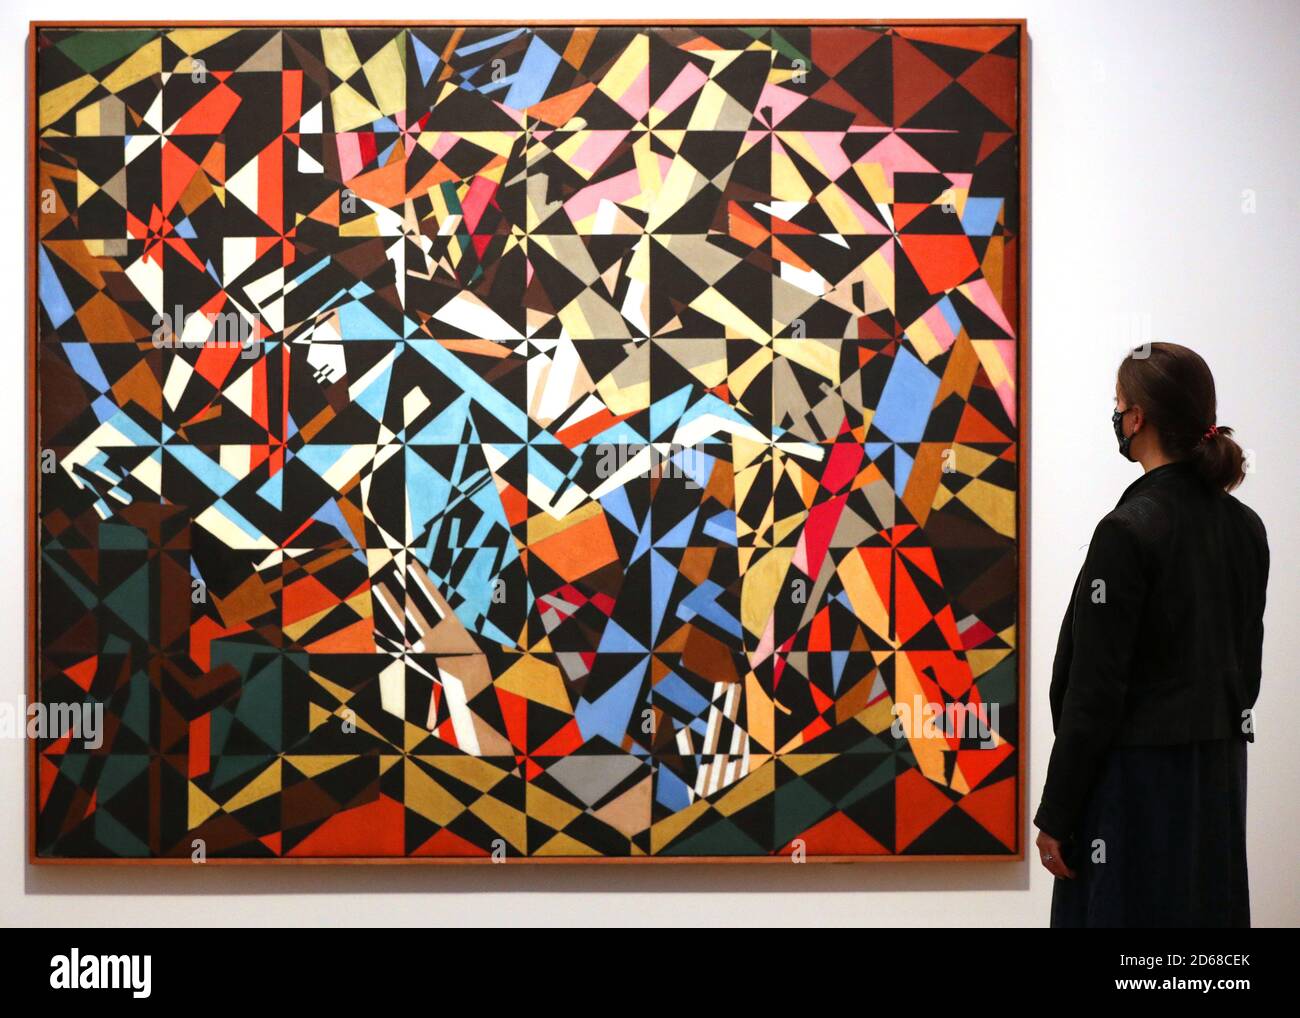 A Tate employee looks at David Bomberg's work 'In the Hold' during a photocall for the new collection displays at Tate Britain in London. Stock Photo